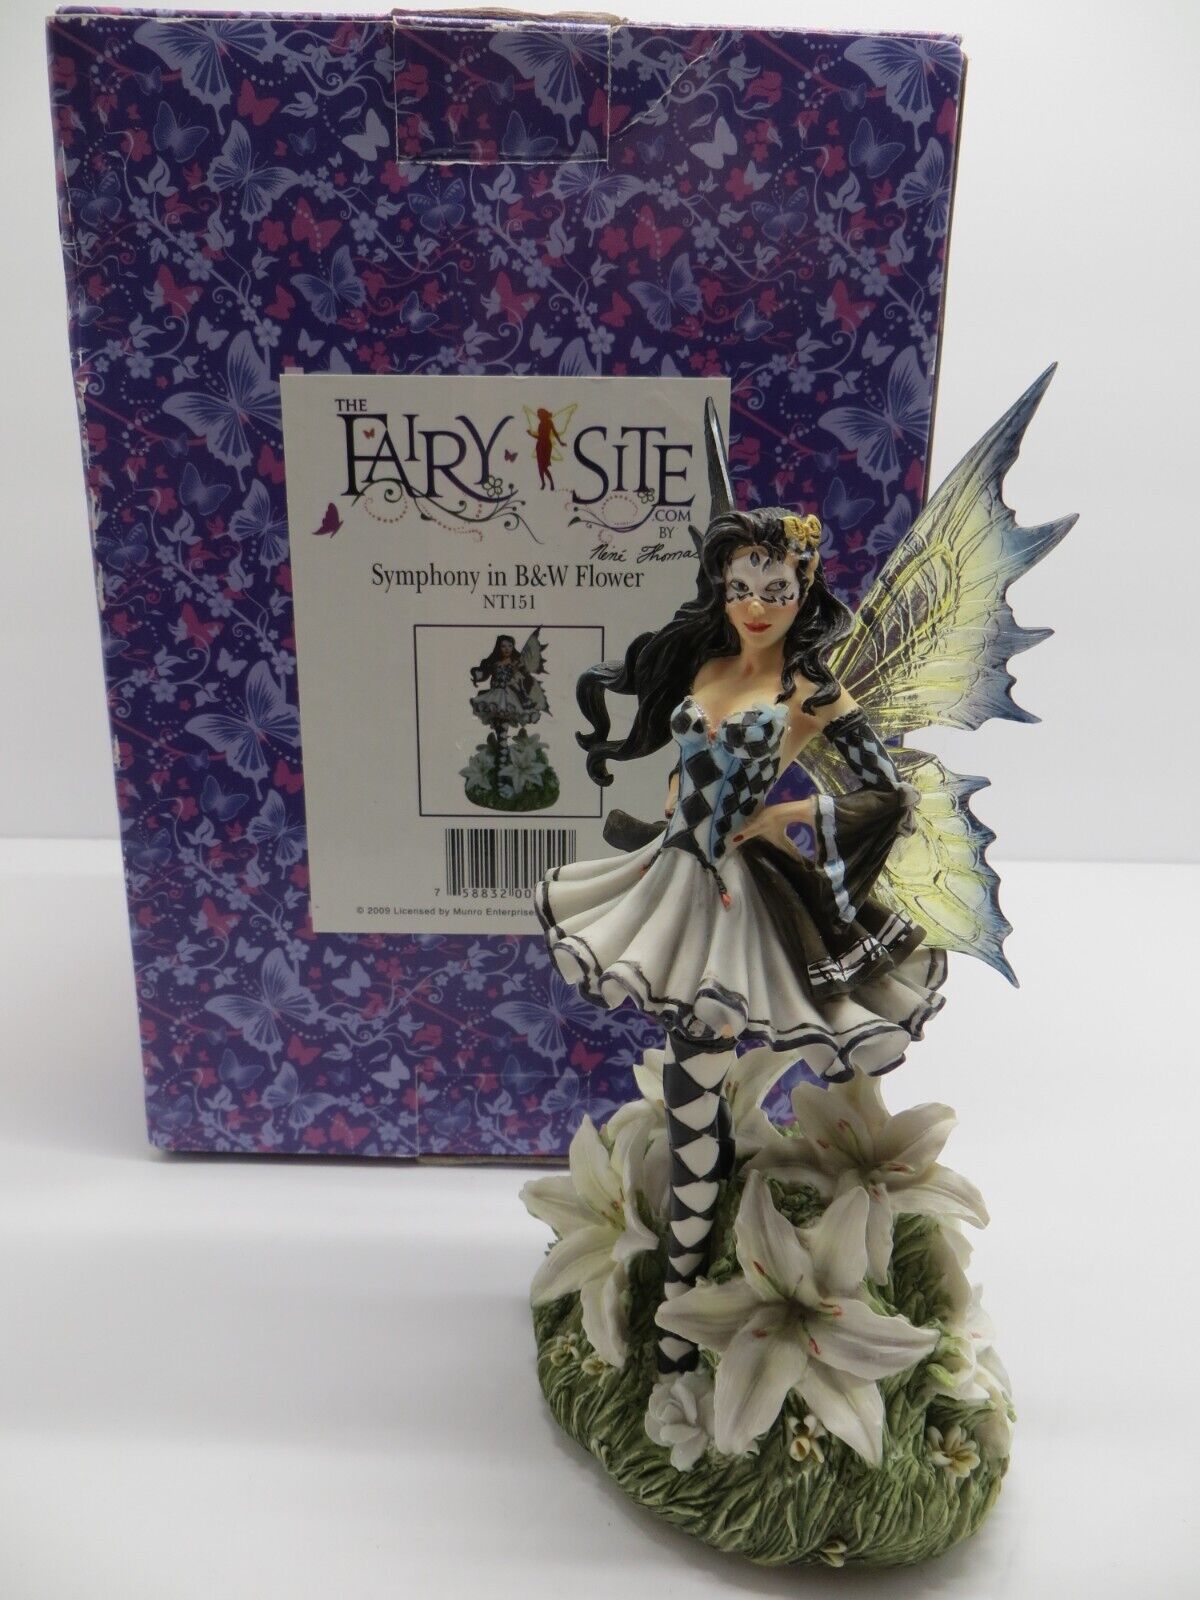 The Fairy Site Symphony in B&W Flower Fairy Statue NT151-Retired 2009 Munro- NEW